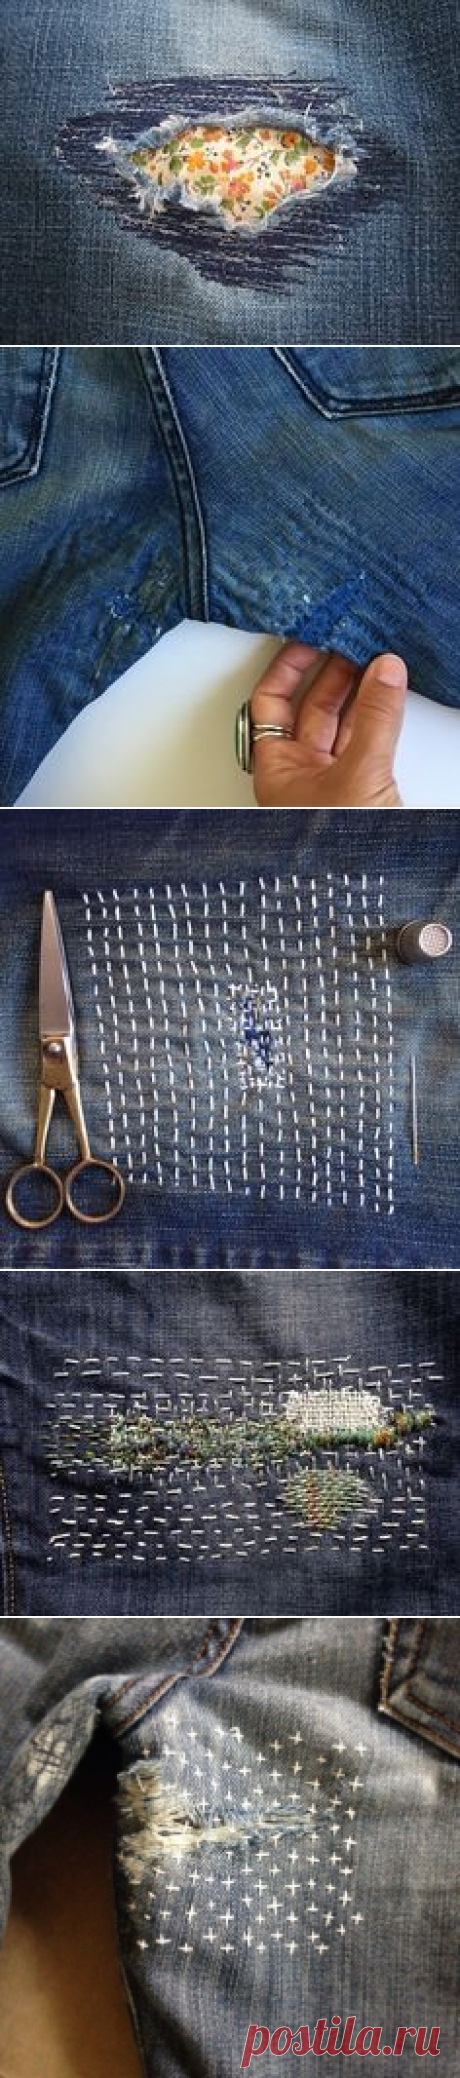 Visible mending  Sewing and such https://ru.pinterest.com/twirgau/sewing-and-such/?utm_campaign=activity&amp;e_t=e4e40daf9b754b82b4111674ba193309&amp;utm_m… | Pinteres…